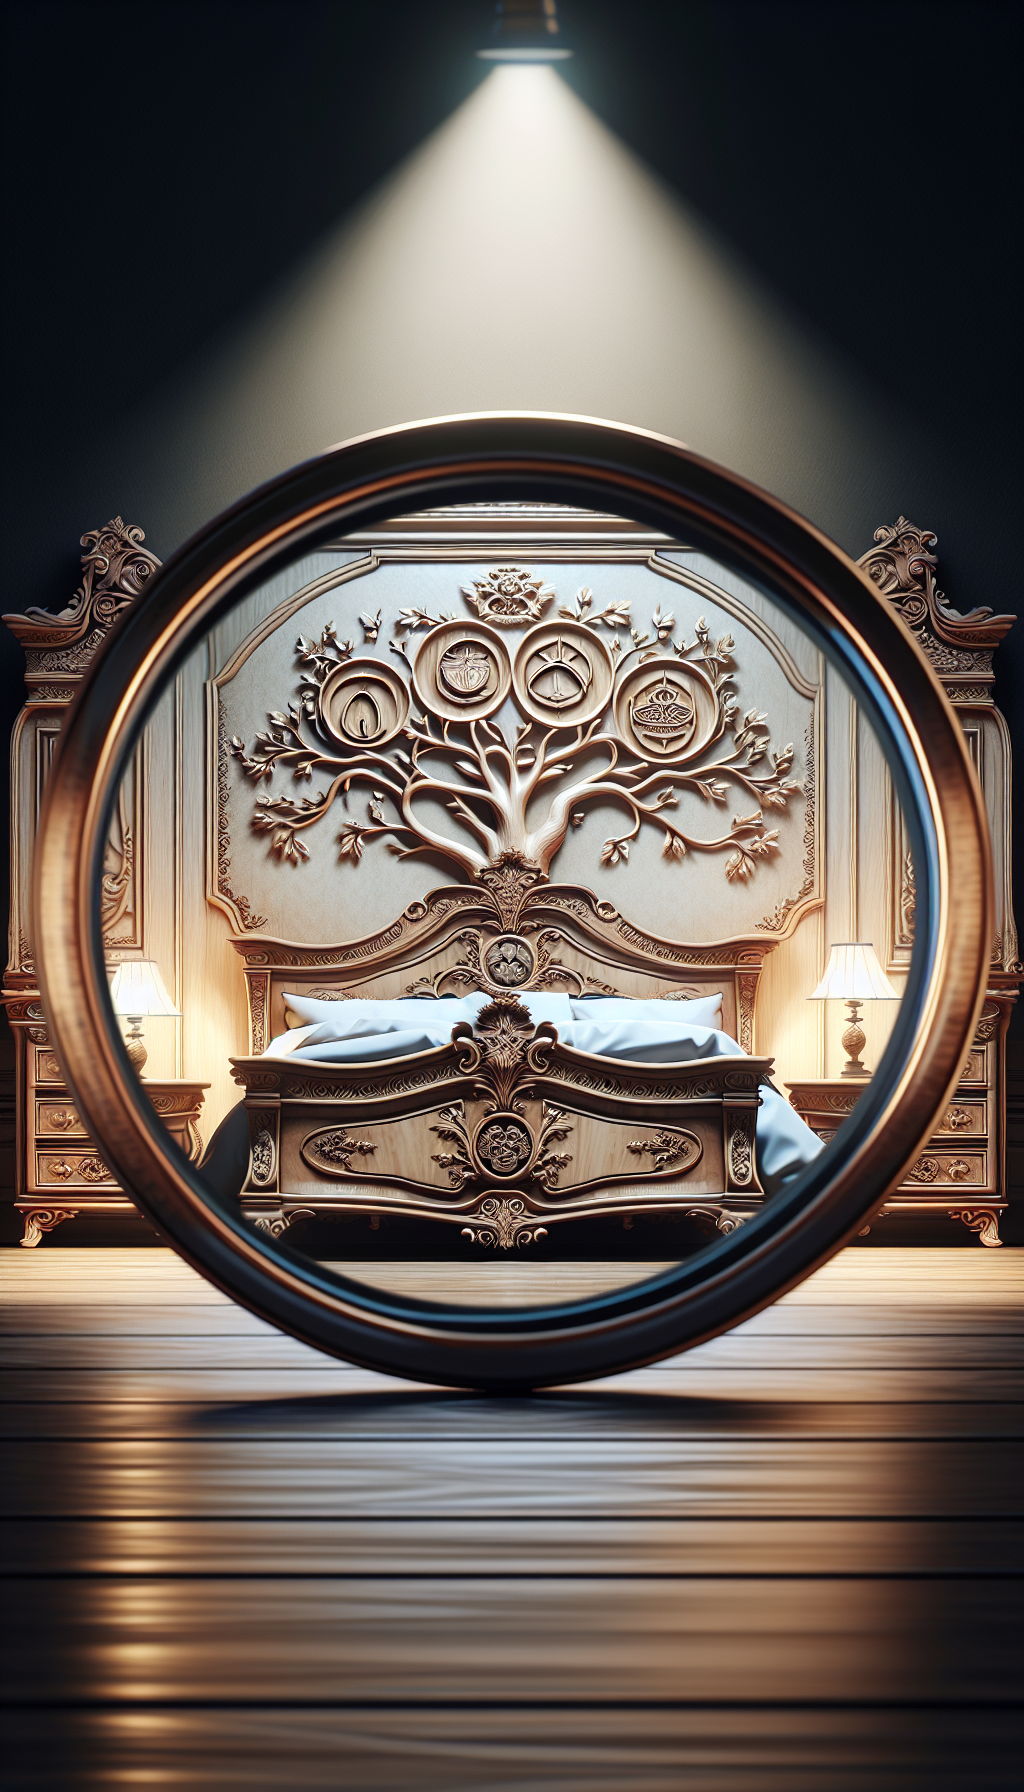 An ornate antique bedroom set sits under a magnifying glass, with elegant lines that trace back through time to a faded historical scene. Each piece has a glowing aura, indicating its high value, while a regal family tree sprouts from the headboard, each branch representing a previous aristocratic owner, emphasizing the set's esteemed provenance and pedigree.